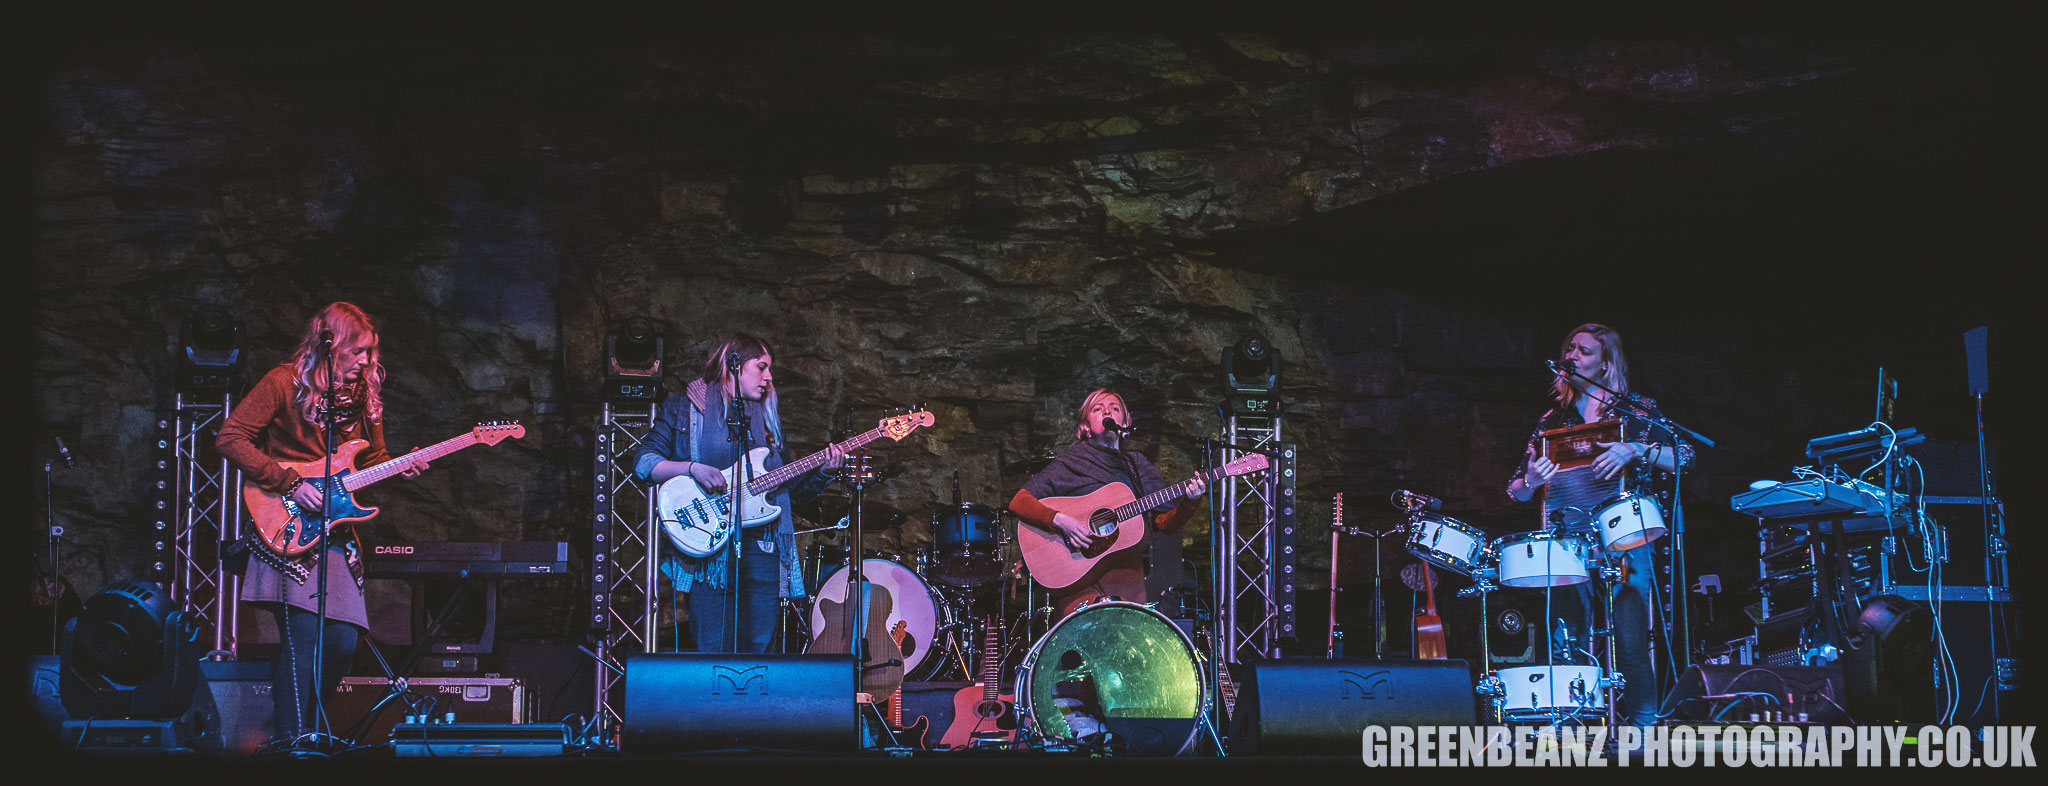  'The Trees' live at Carnglaze Caverns